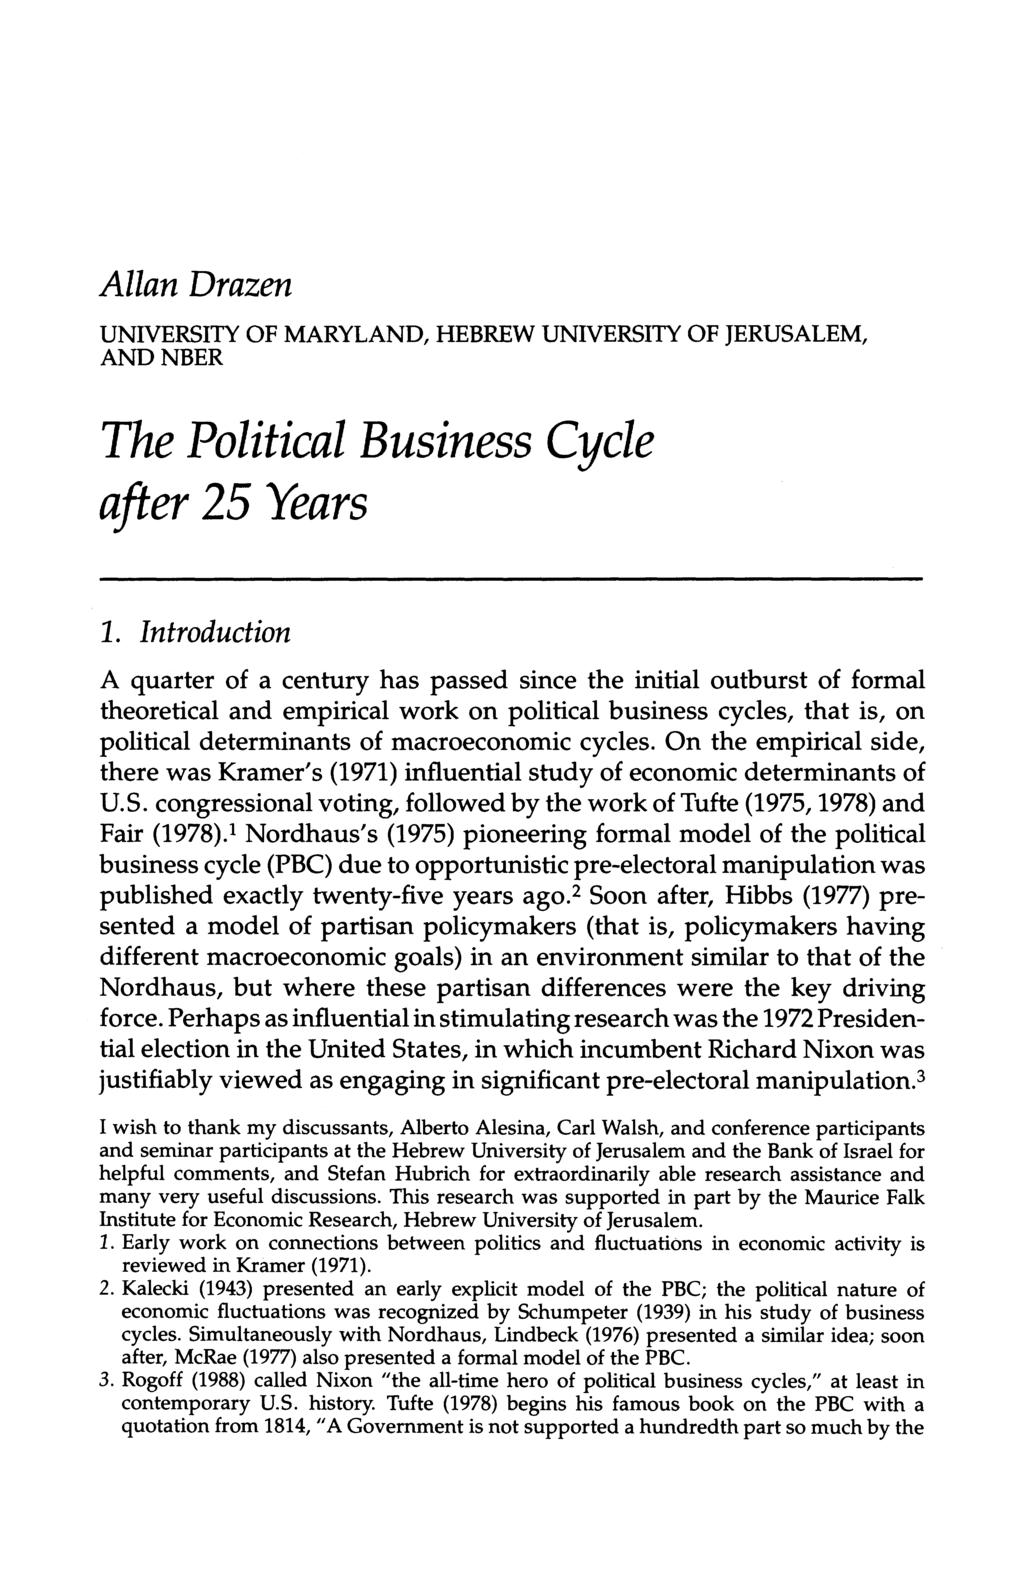 Allan Drazen UNIVERSITY OF MARYLAND, HEBREW UNIVERSITY OF JERUSALEM, AND NBER The Political Business Cycle after 25 Years 1.